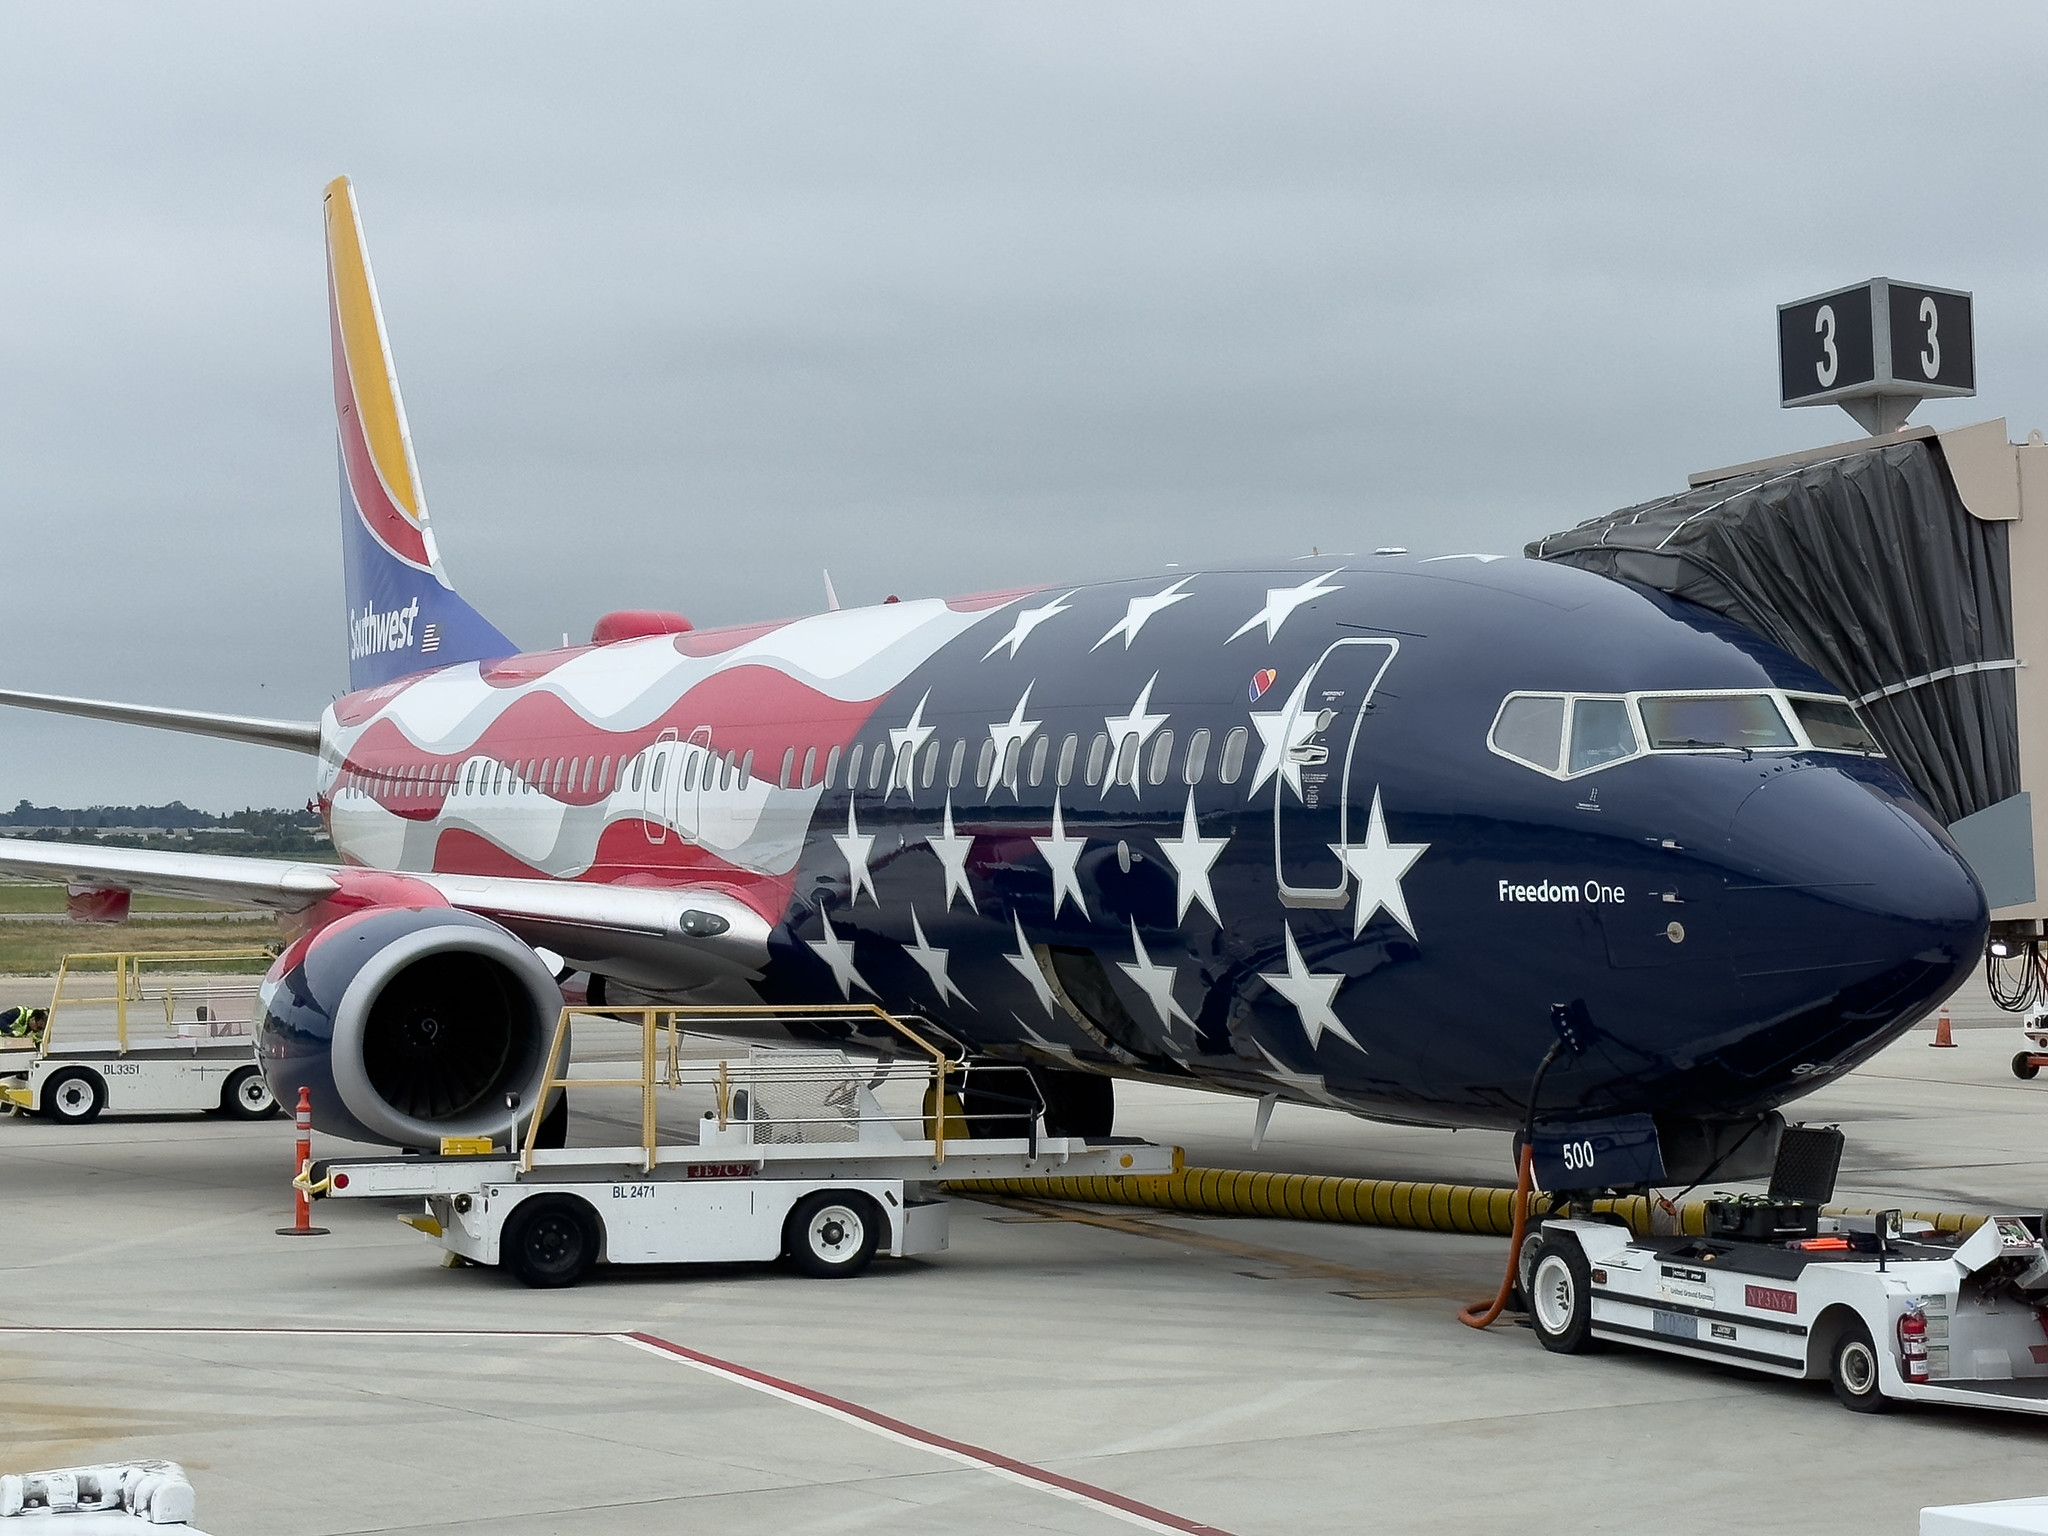 A Southwest Airlines aircraft painted in Freedom One livery parked at the gate.